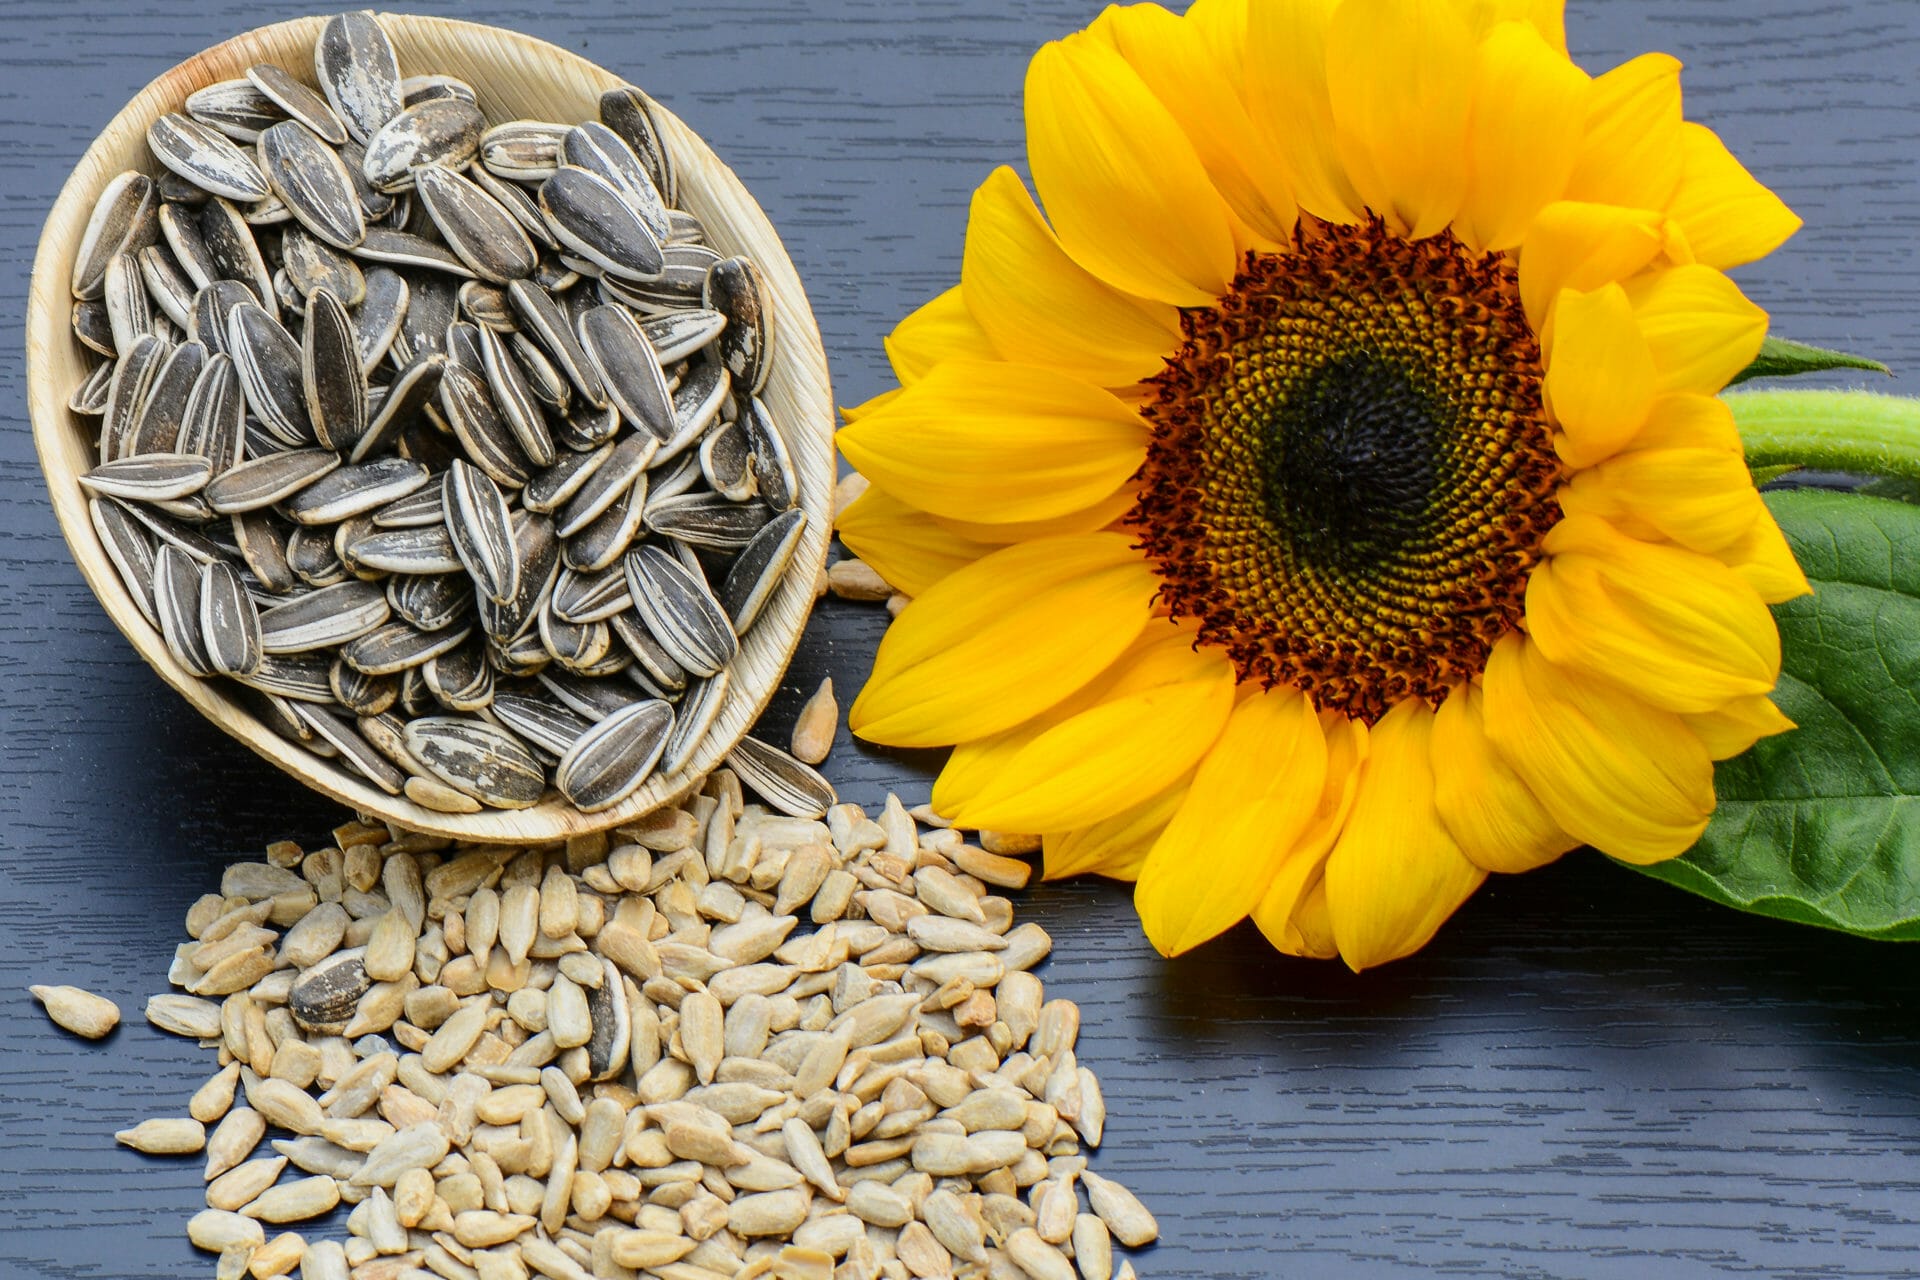 Sunflower seeds are high in omega 6